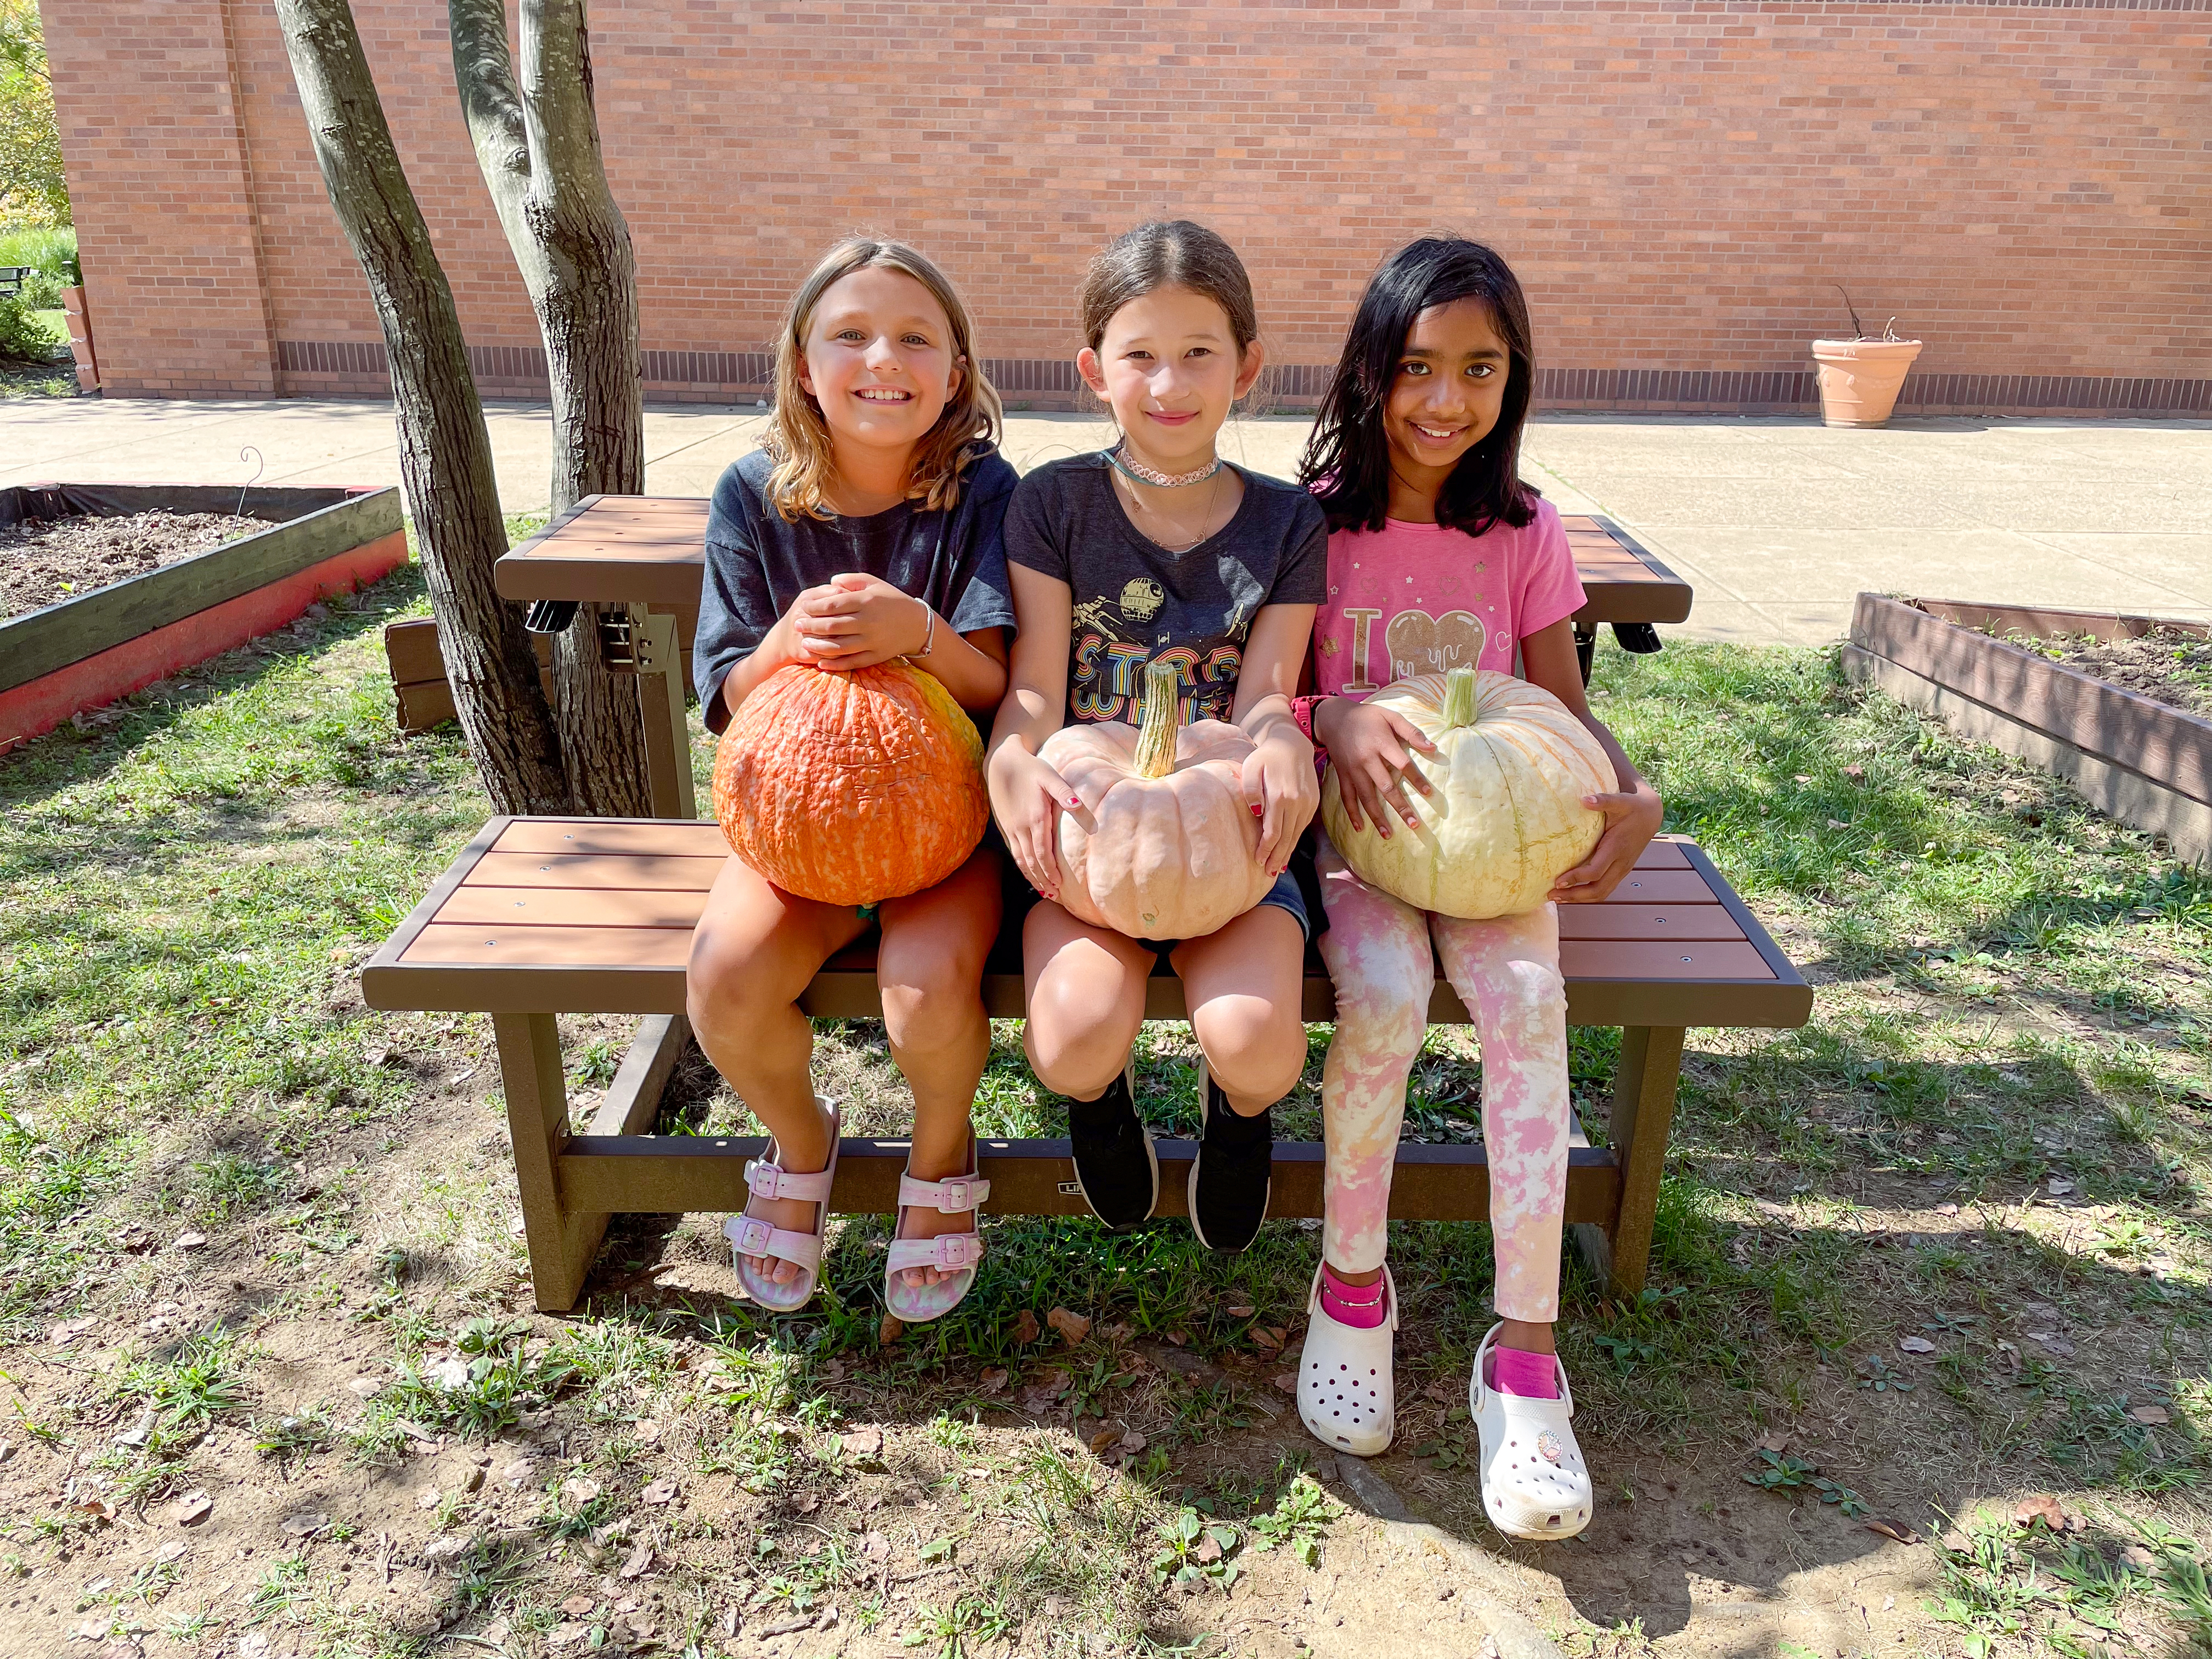 Student volunteers at Centreville Elementary School's farmers market hold some fresh gourds up for sale.